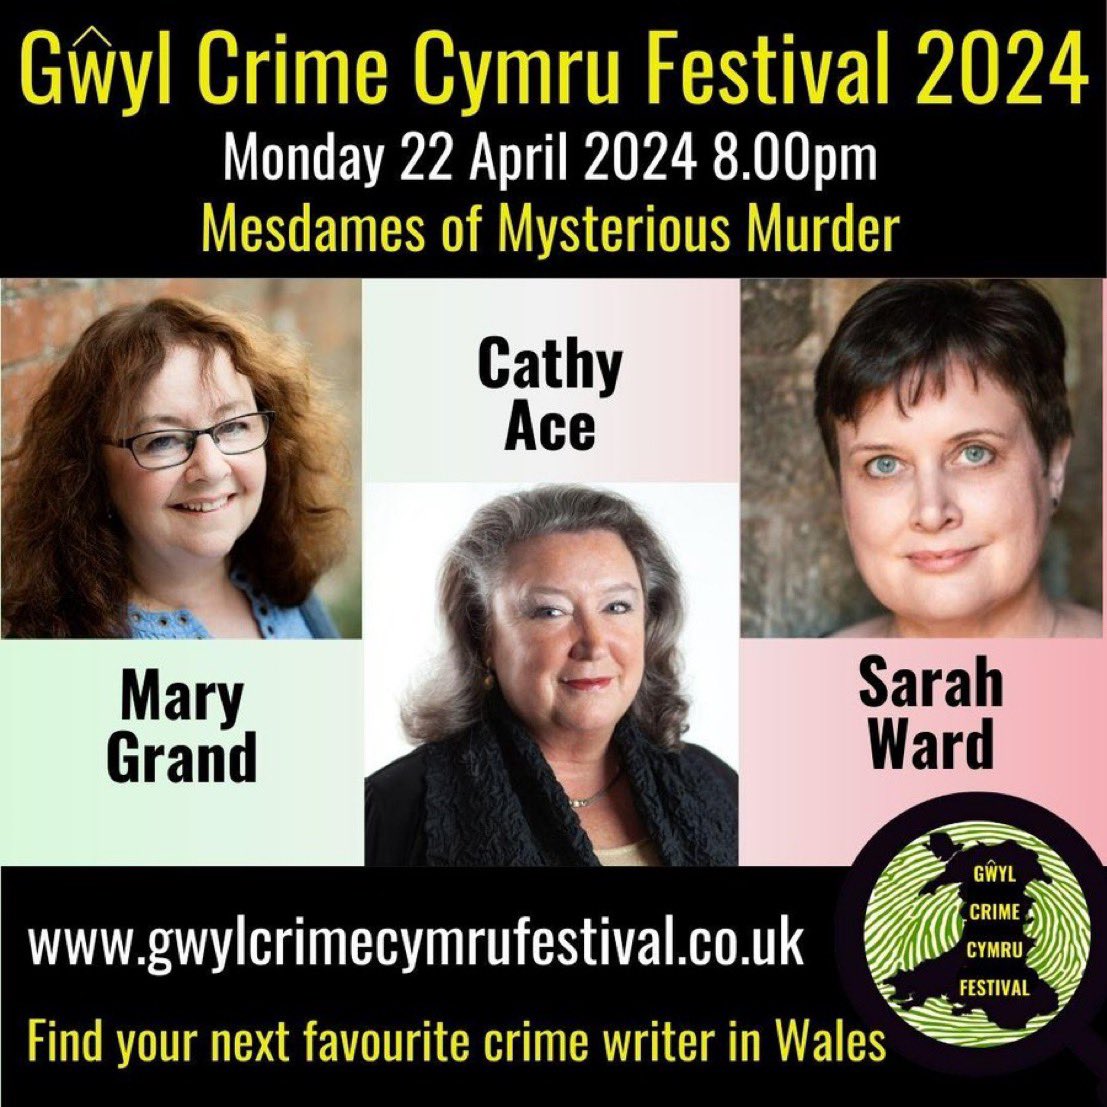 Our very own @authormaryg will be at @GwylCrimeFest next week, on Monday 22nd April! 'Madames of Mysterious Murder' is the perfect panel for fans of crime fiction, Agatha Christie and female amateur sleuths! 🔎 Get your tickets here 🎟 gwylcrimecymrufestival.co.uk/pif/